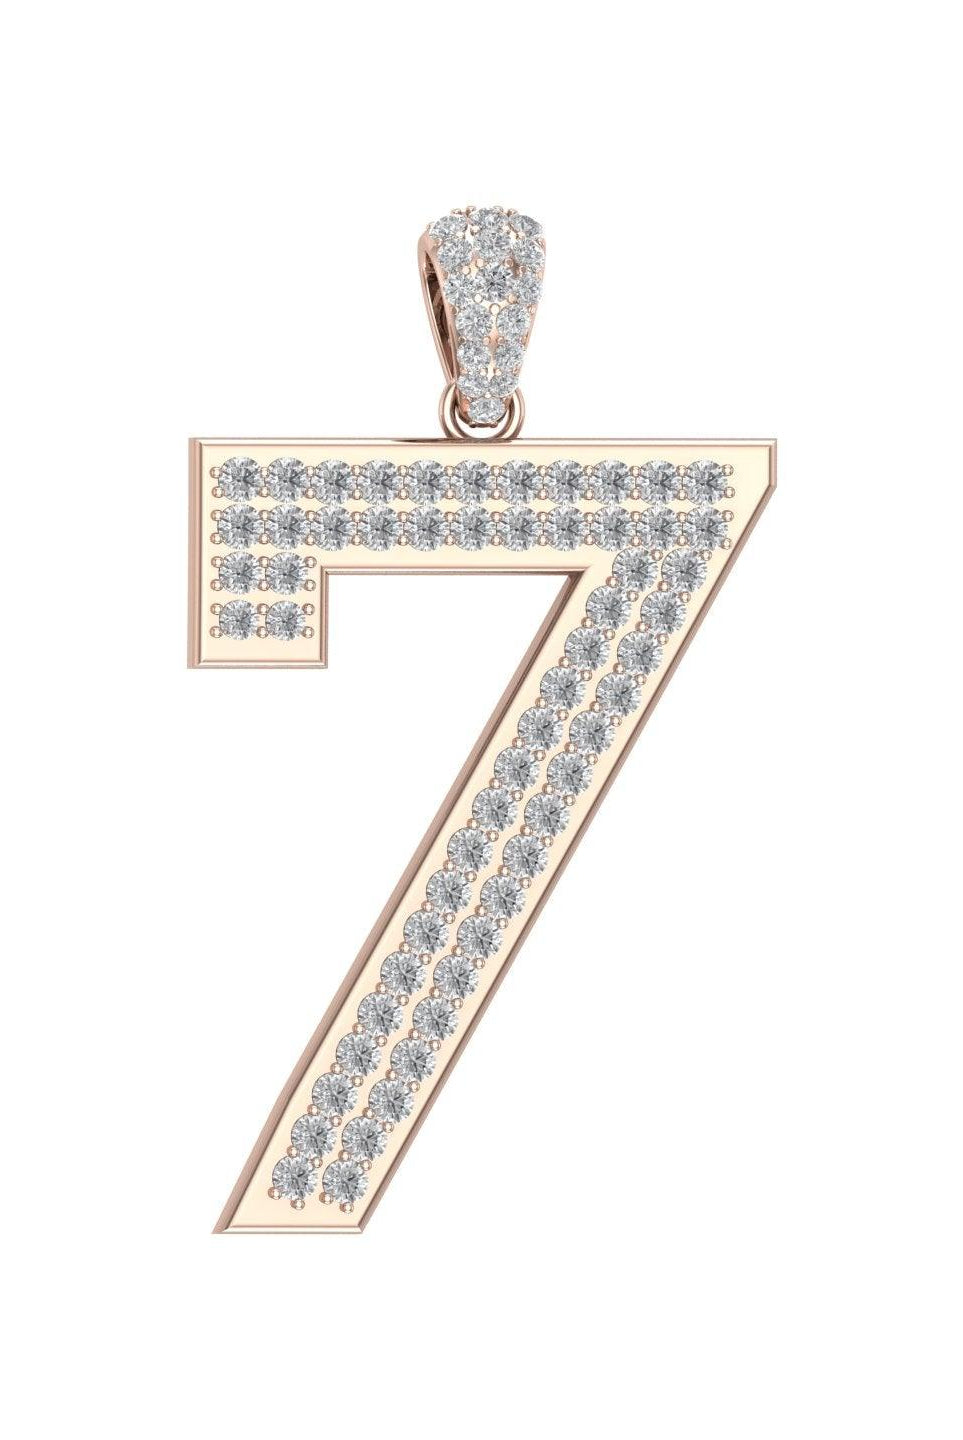 Rose Gold Color Pendant in the Shape of 7 Made of 925 Sterling Silver Material with 20 Inch Long Silver Chain